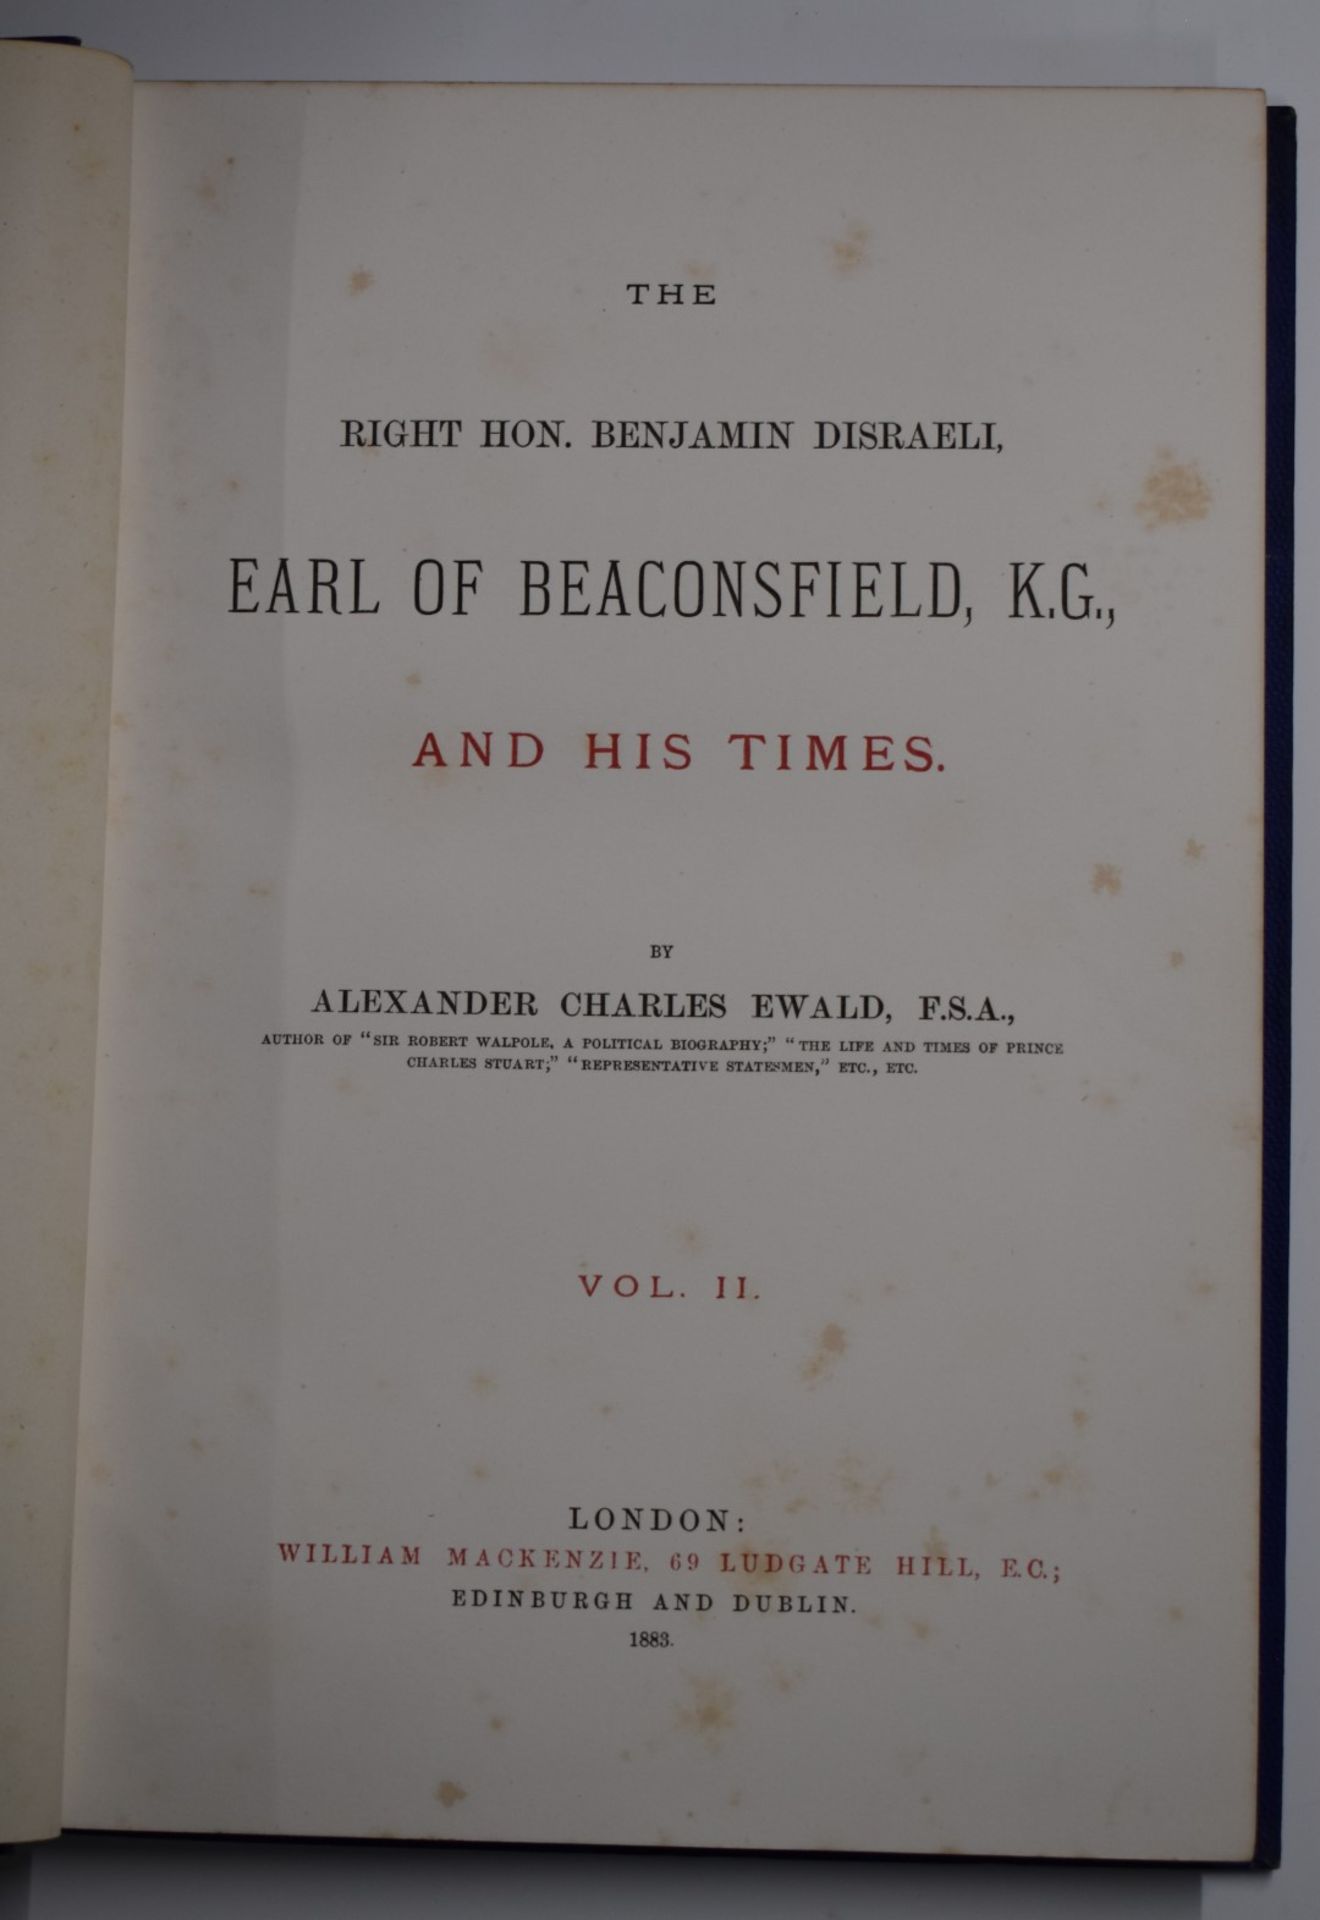 The Right Hon. Benjamin Disraeli, Earl of Beaconsfield KG and His Times by Alexander Charles - Image 2 of 2